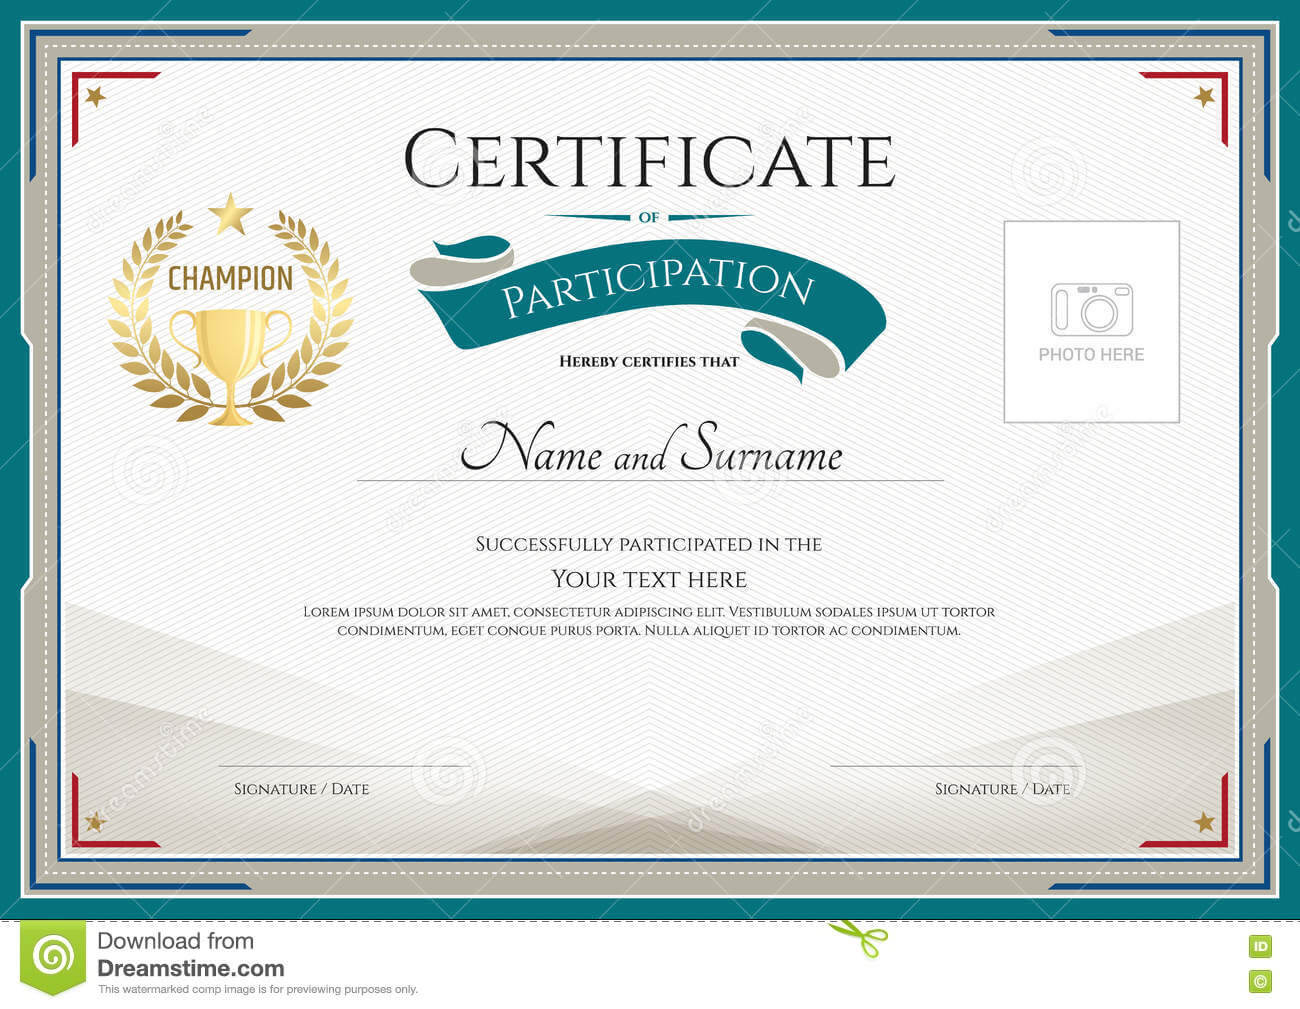 Certificate Of Participation Template With Green Broder Inside Certificate Of Participation Word Template